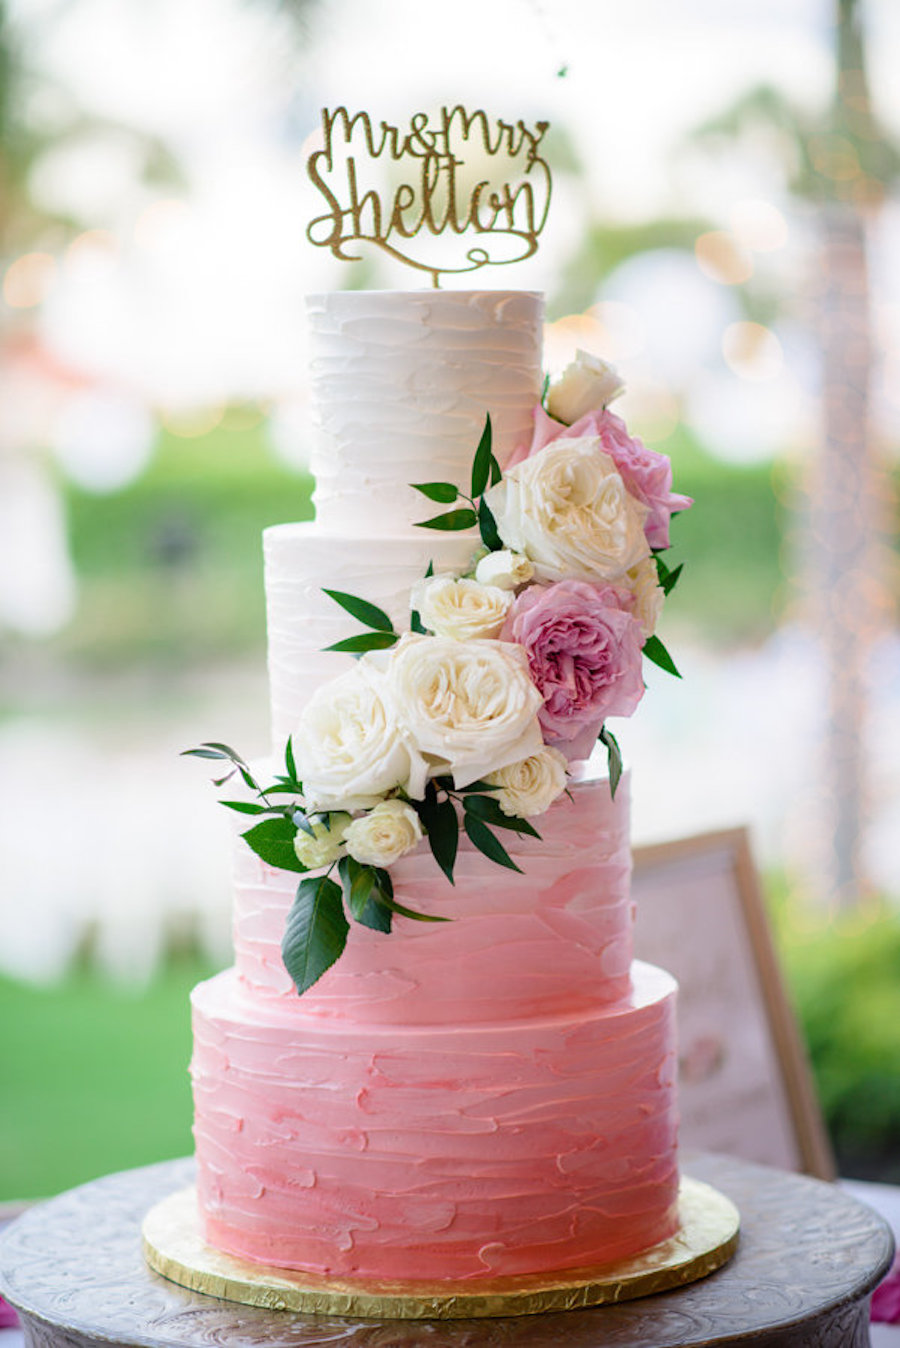 Four Tier Round White to Pink Ombre Wedding Cake on Gold Flat Cake Stand with Stylish Gold Caketopper and White and Pink Roses with Greenery